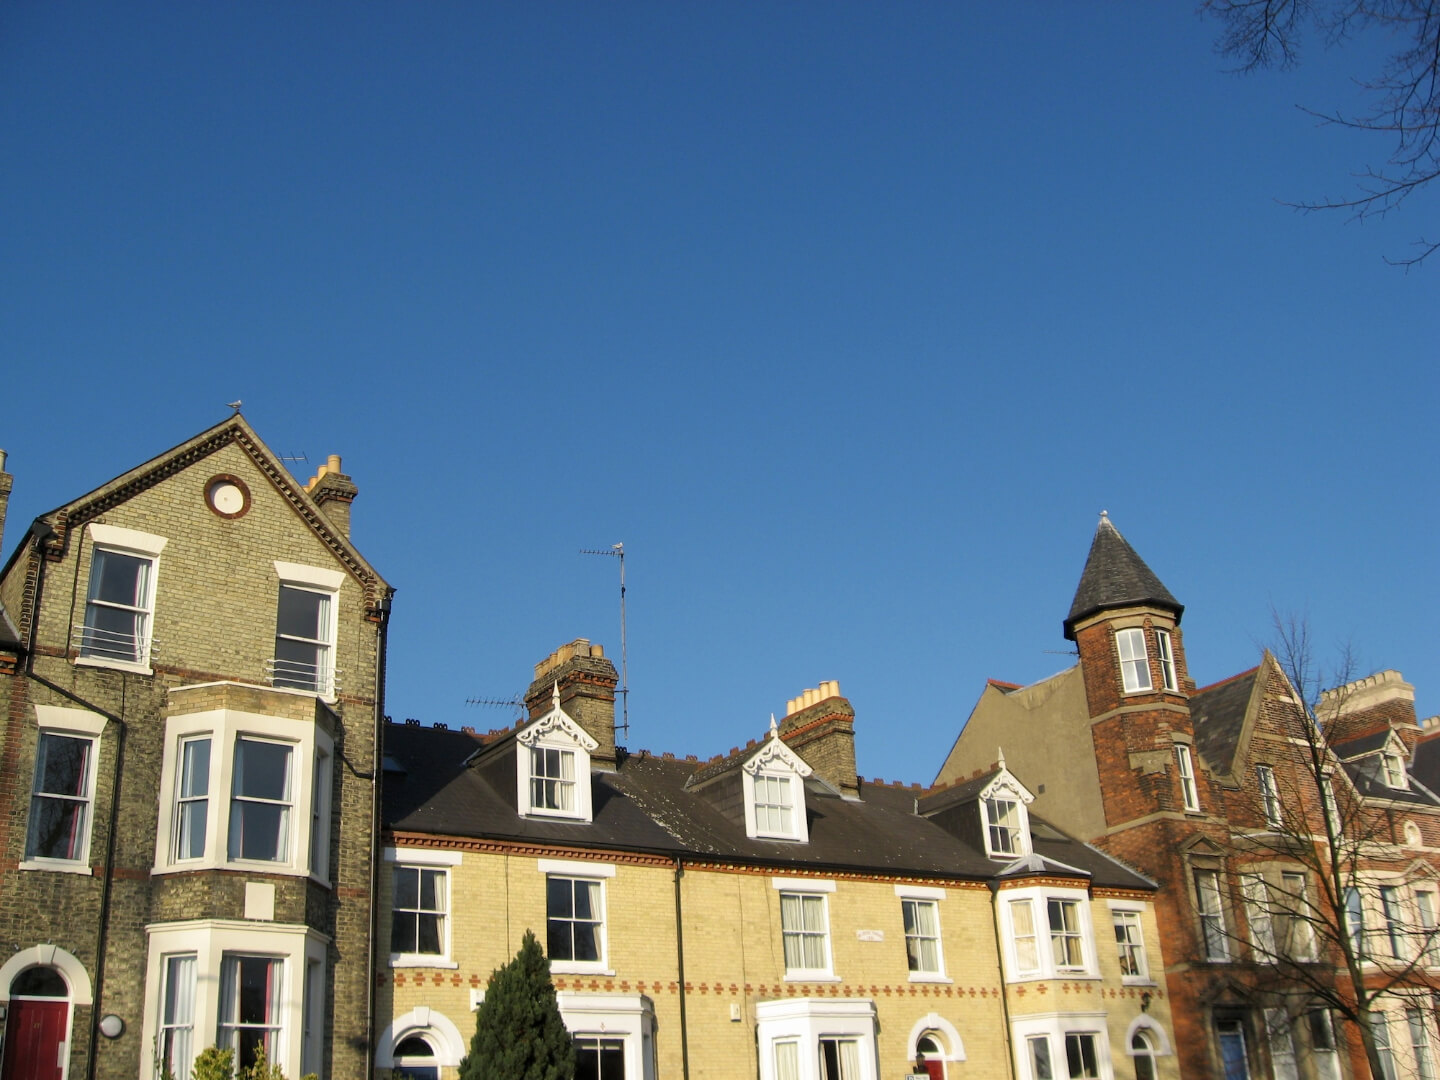 Student Accommodation in Chesterton, Cambridge - selection of houses on Chesterton Road